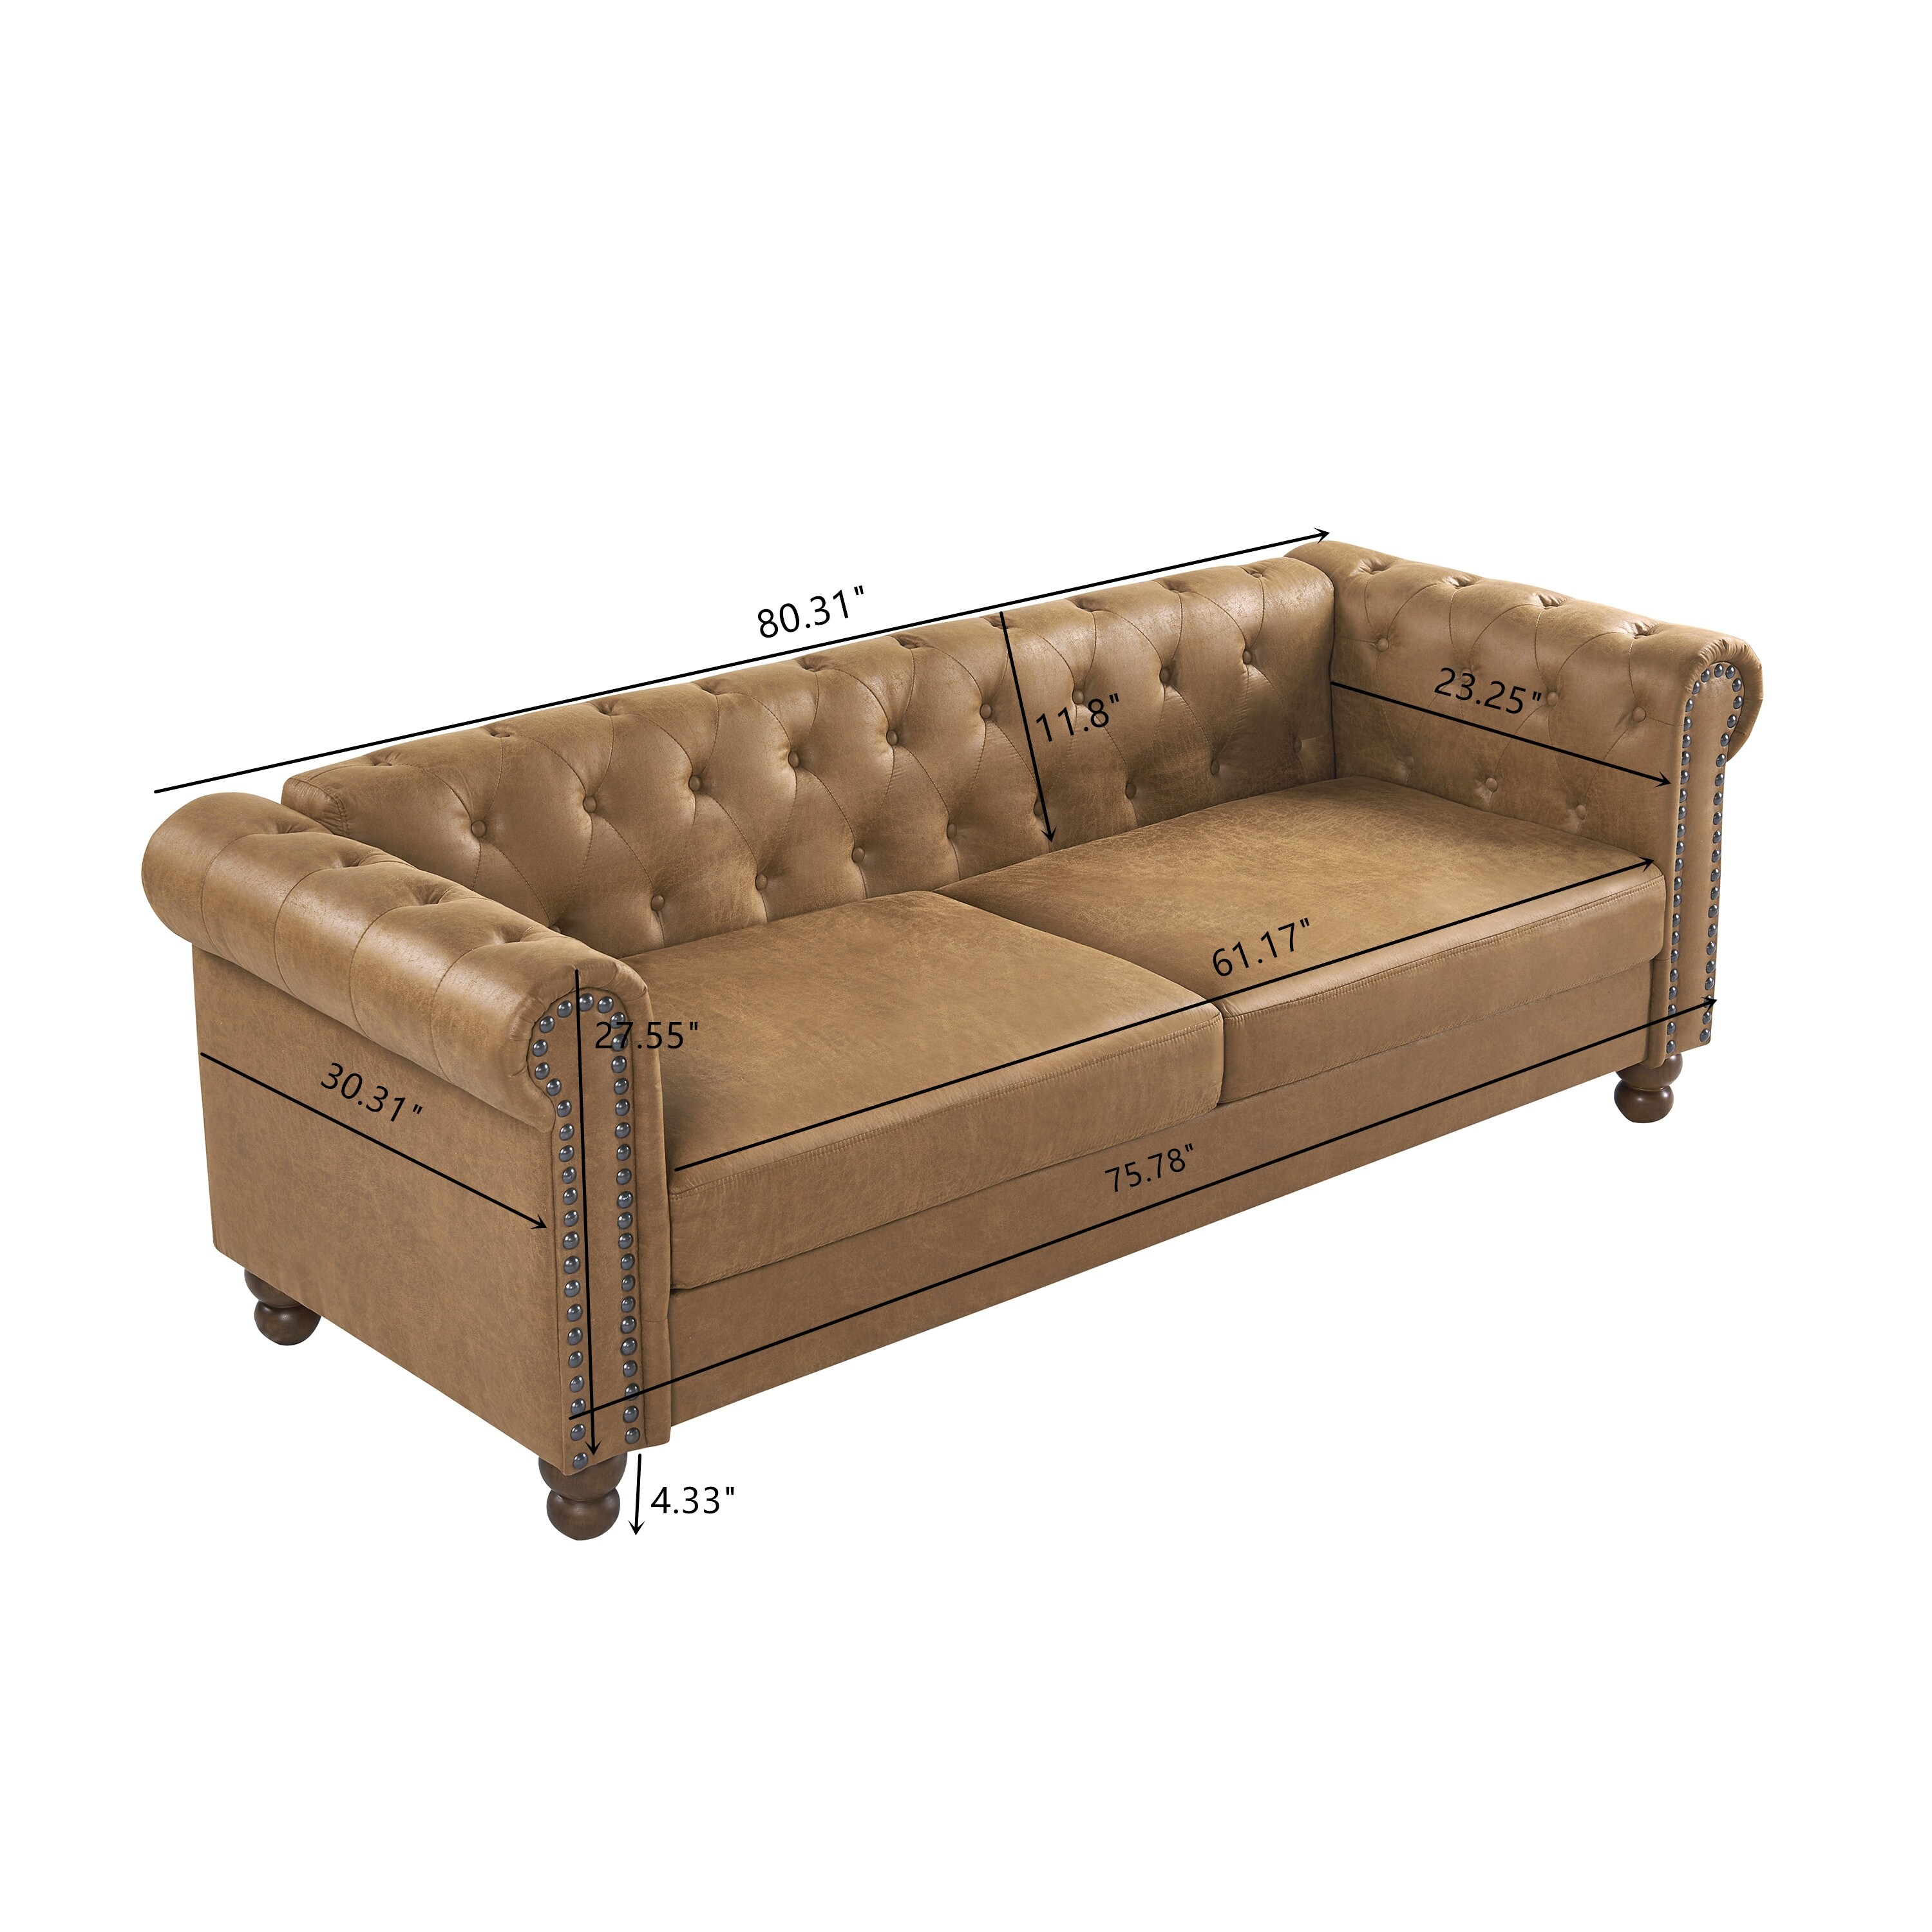 Upholstered Sofa Couch with high-tech Fabric Surface